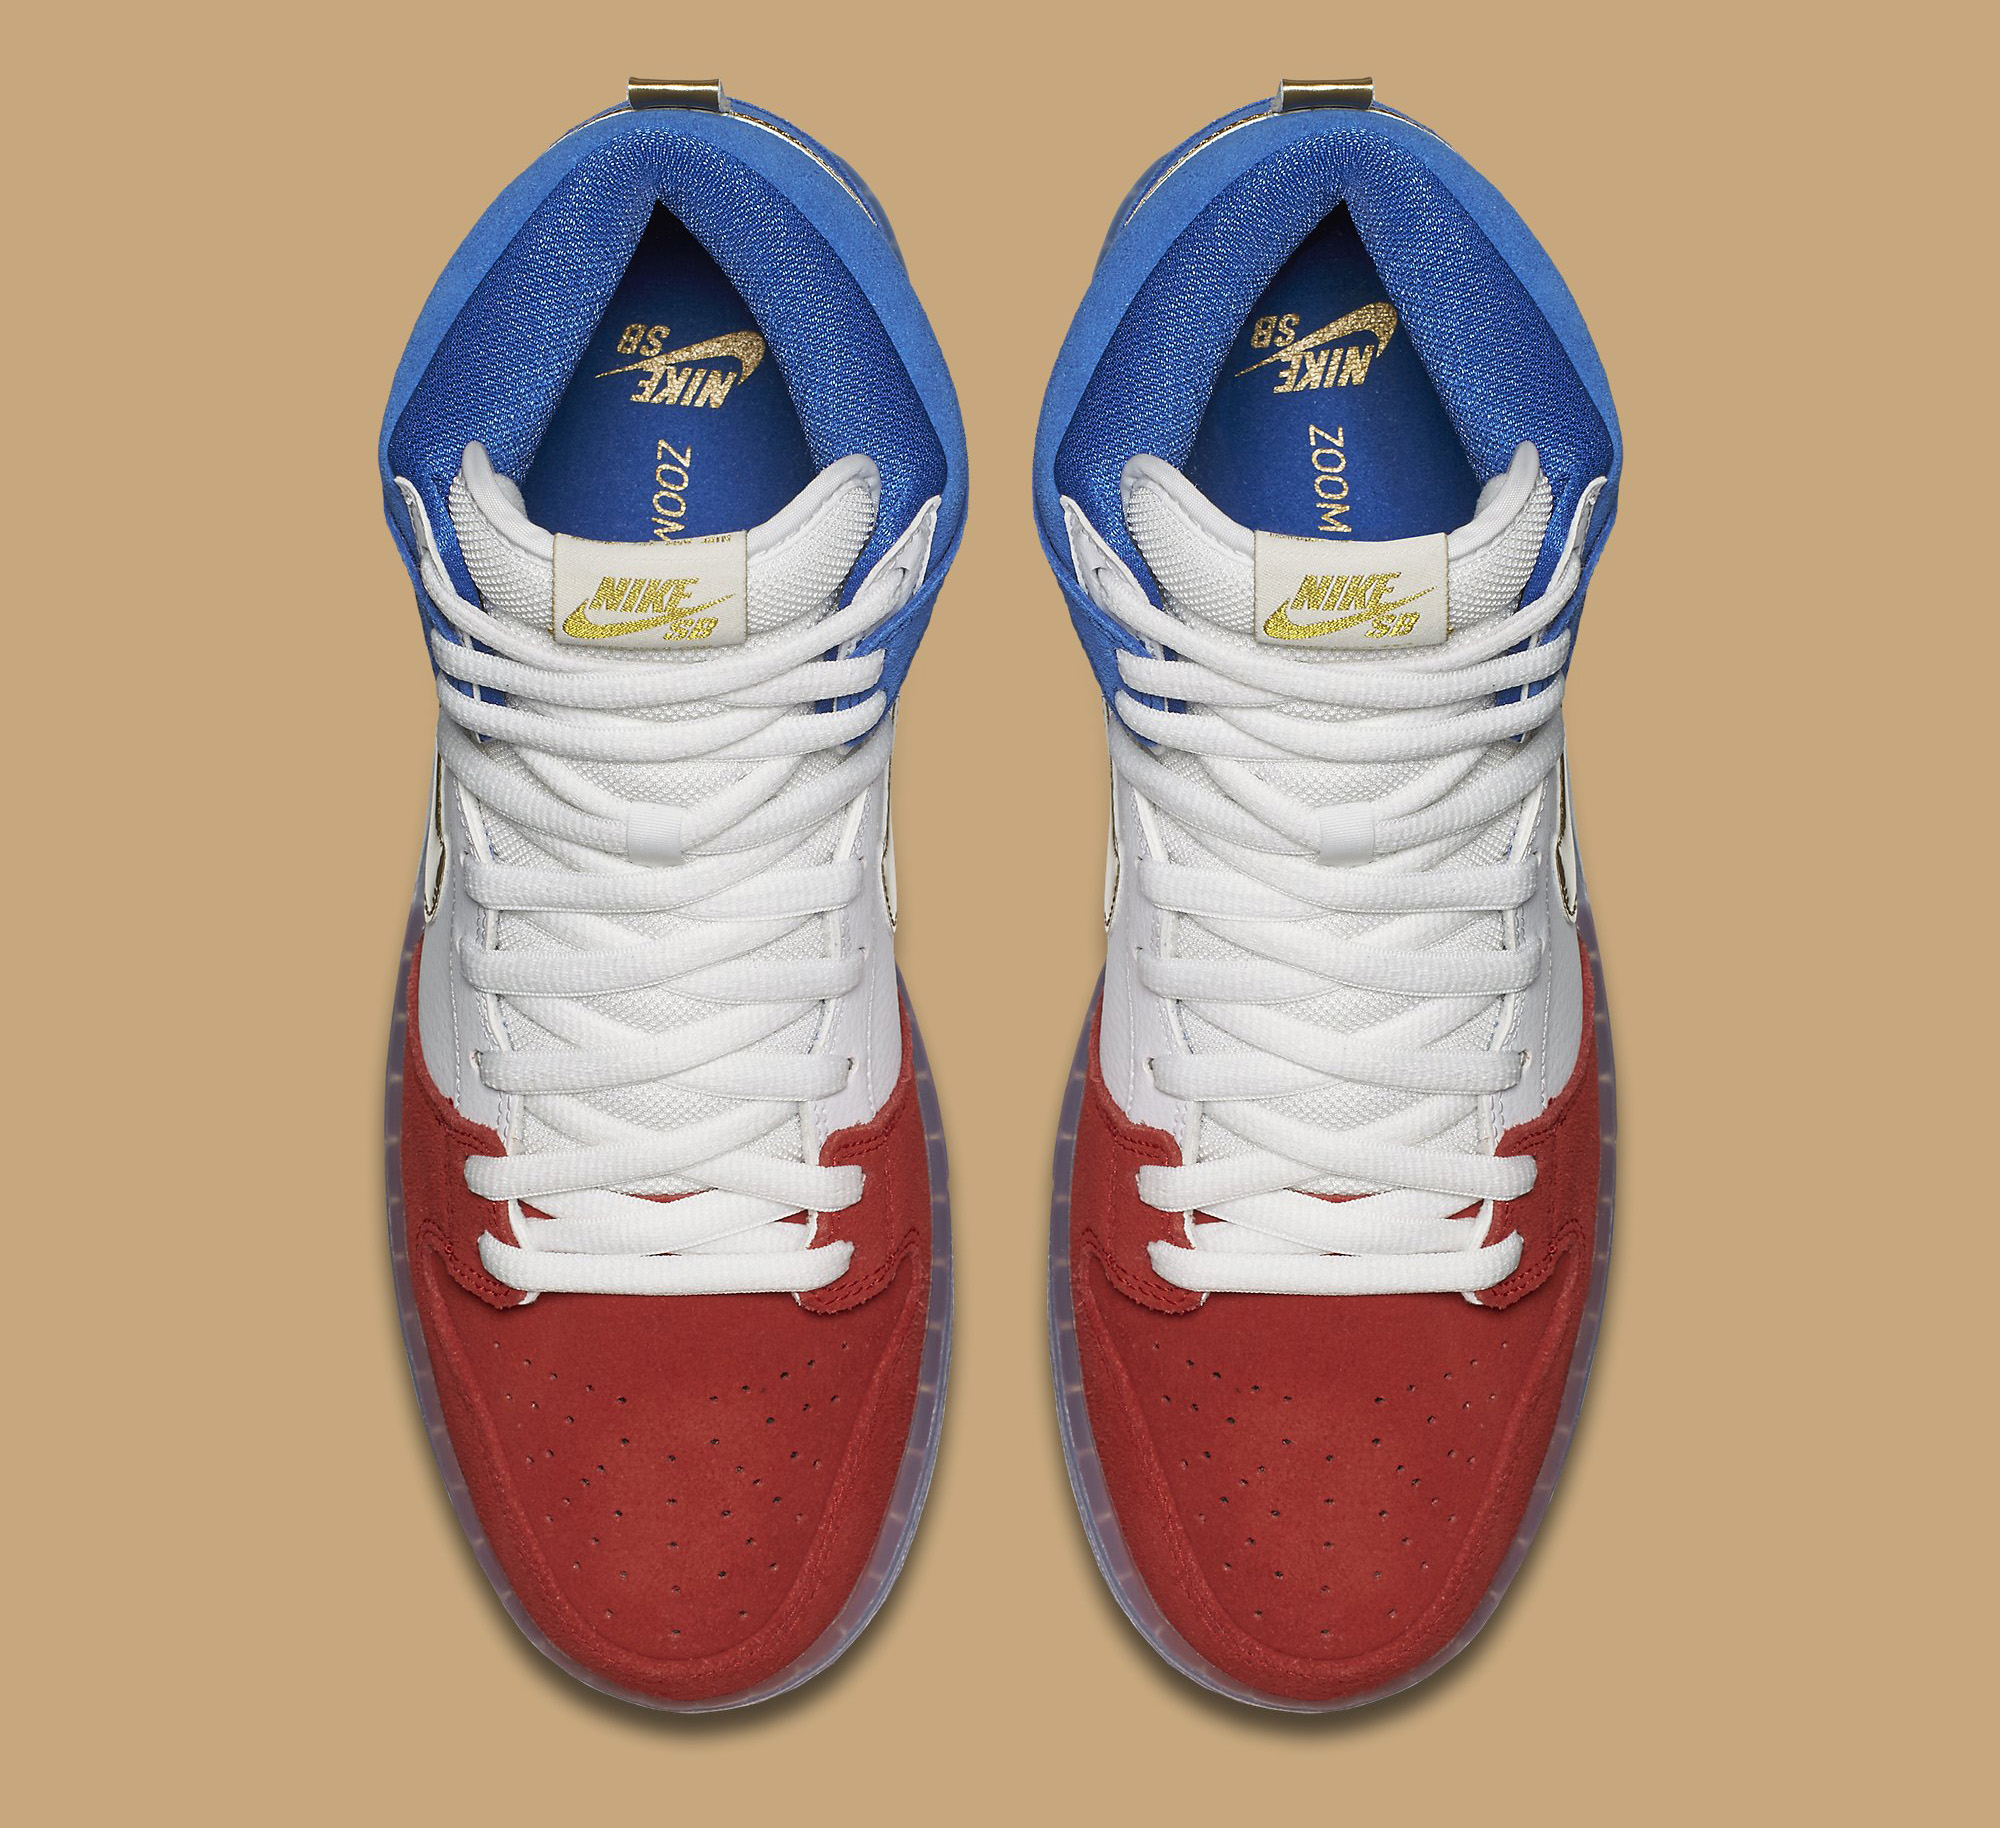 nike sb red white and blue